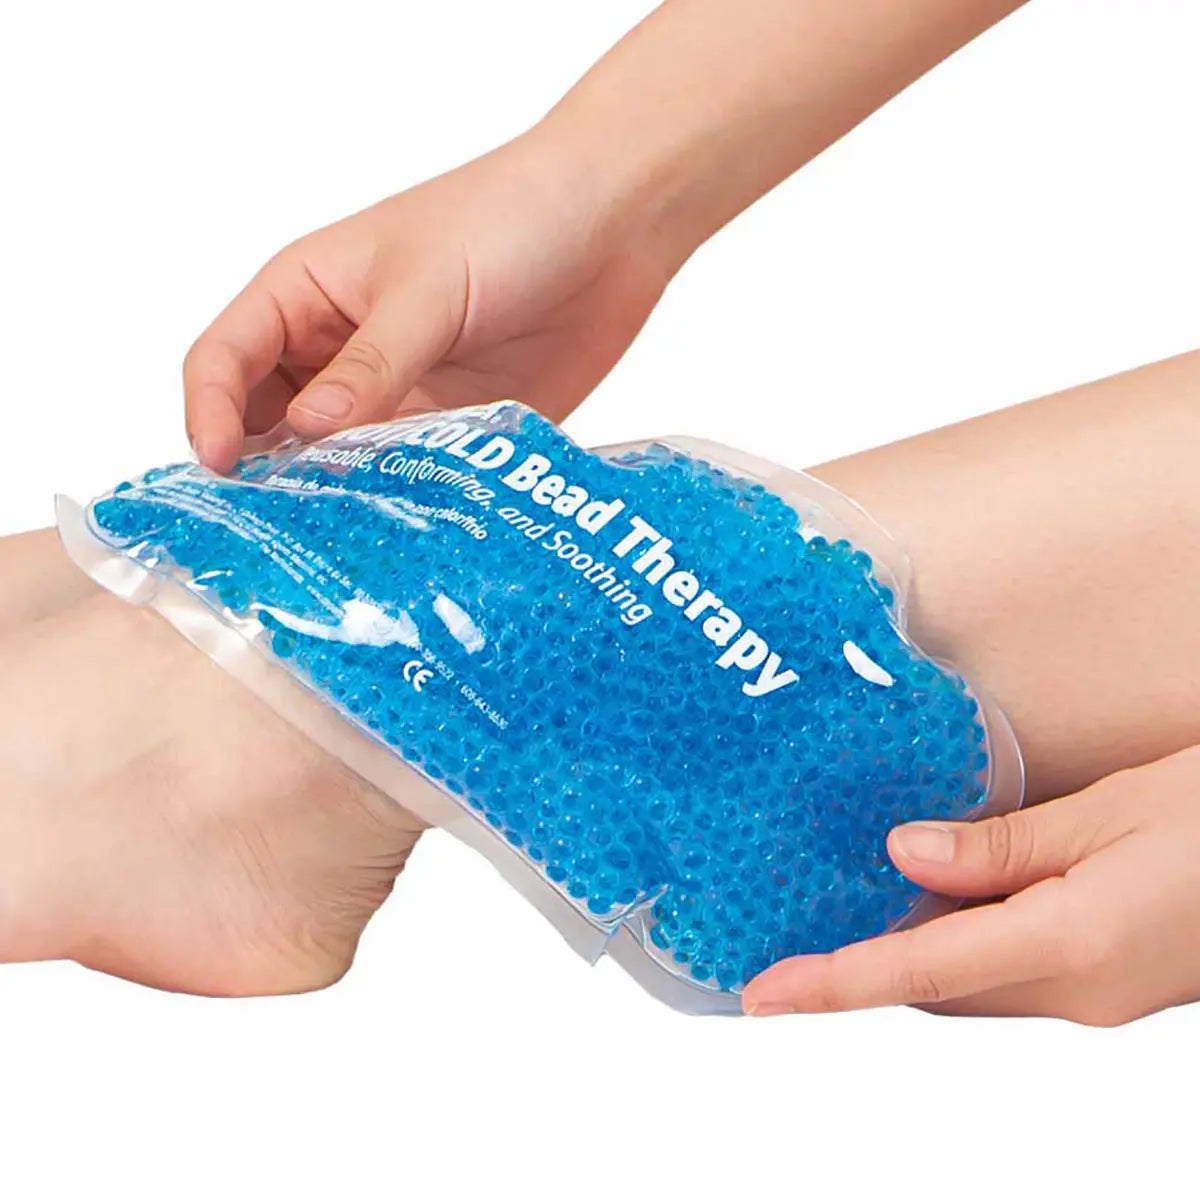 Mueller Beaded Hot/Cold Therapy Pack - Blue Mueller Sports Medicine